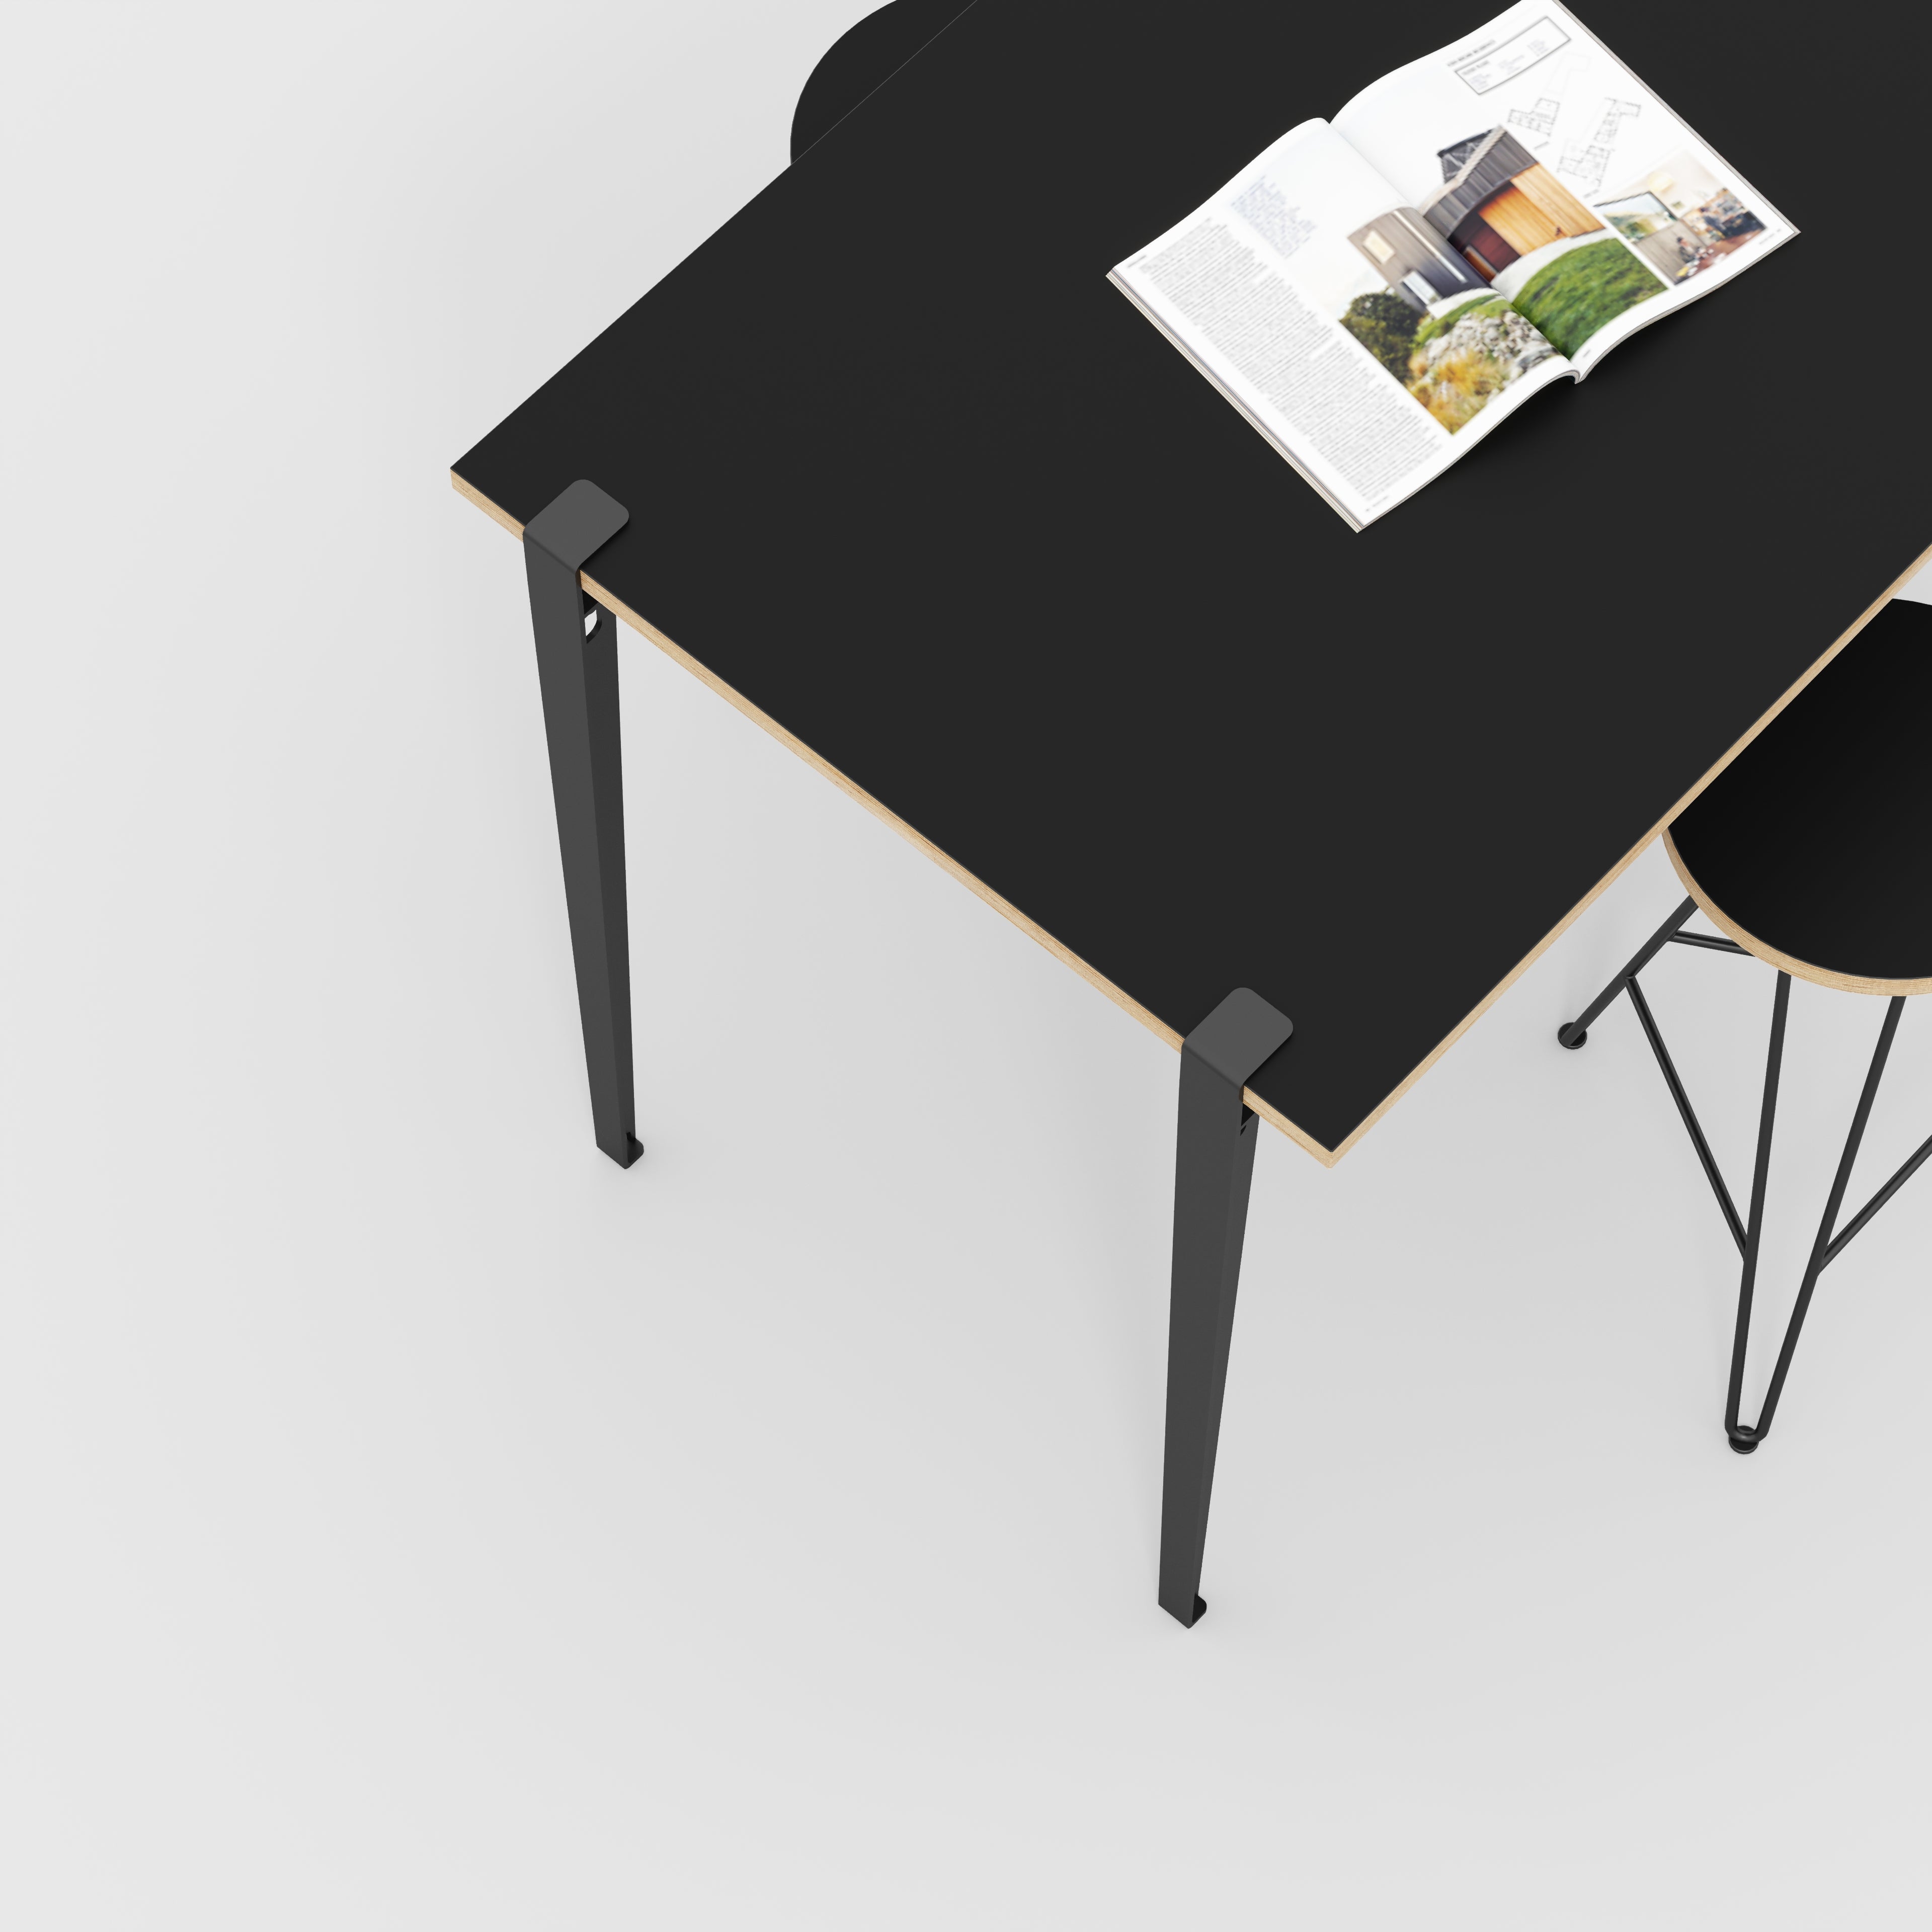 Wall Table with Black Tiptoe Legs and Brackets - Formica Diamond Black - 1200(w) x 800(d) x 900(h)